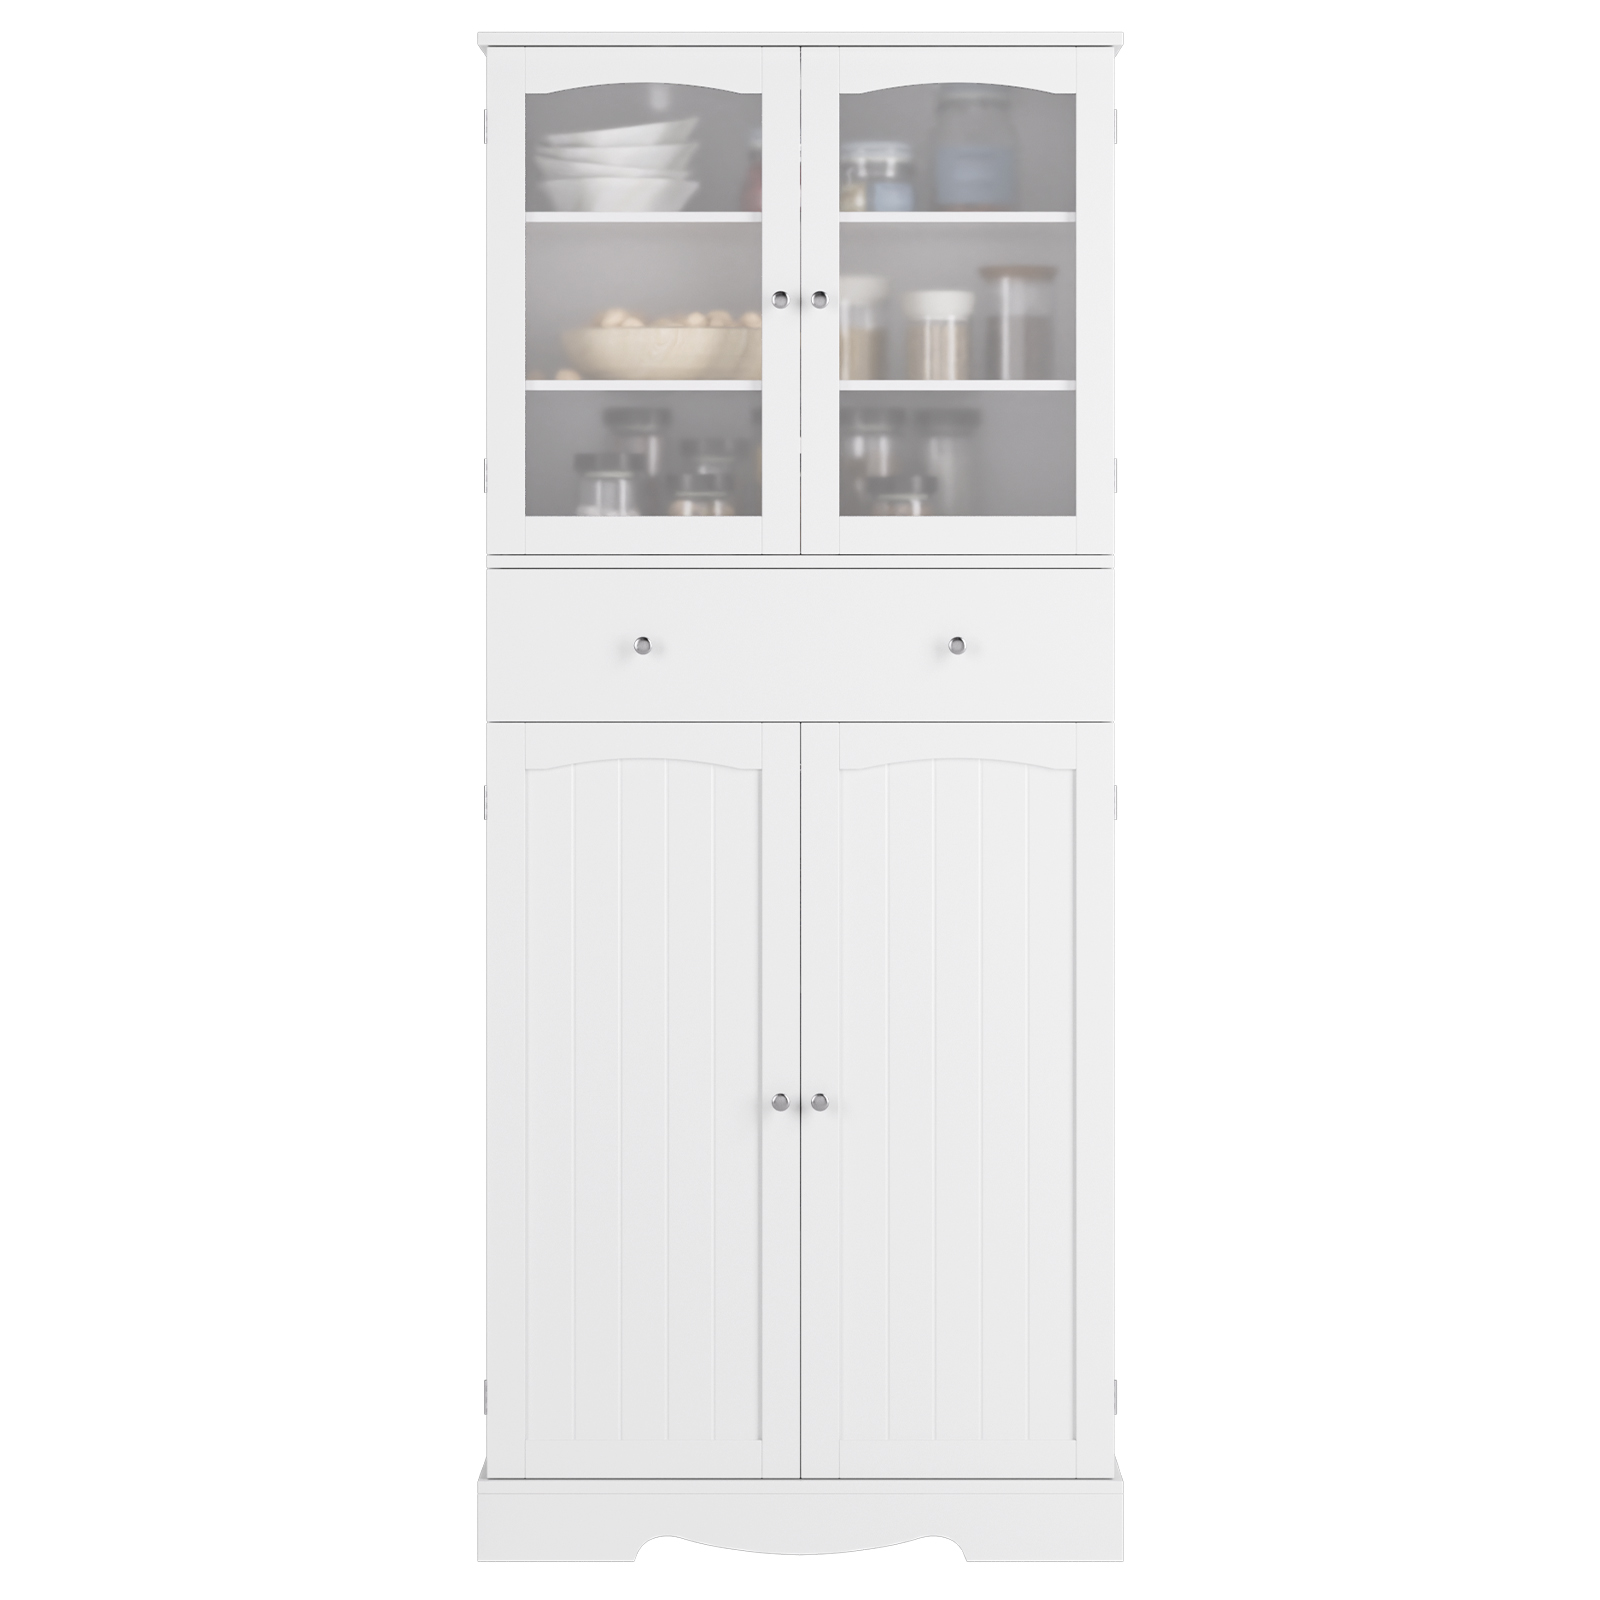 Homfa 72.4'' Tall Kitchen Pantry with 4 Doors, Large Drawer Storage CA